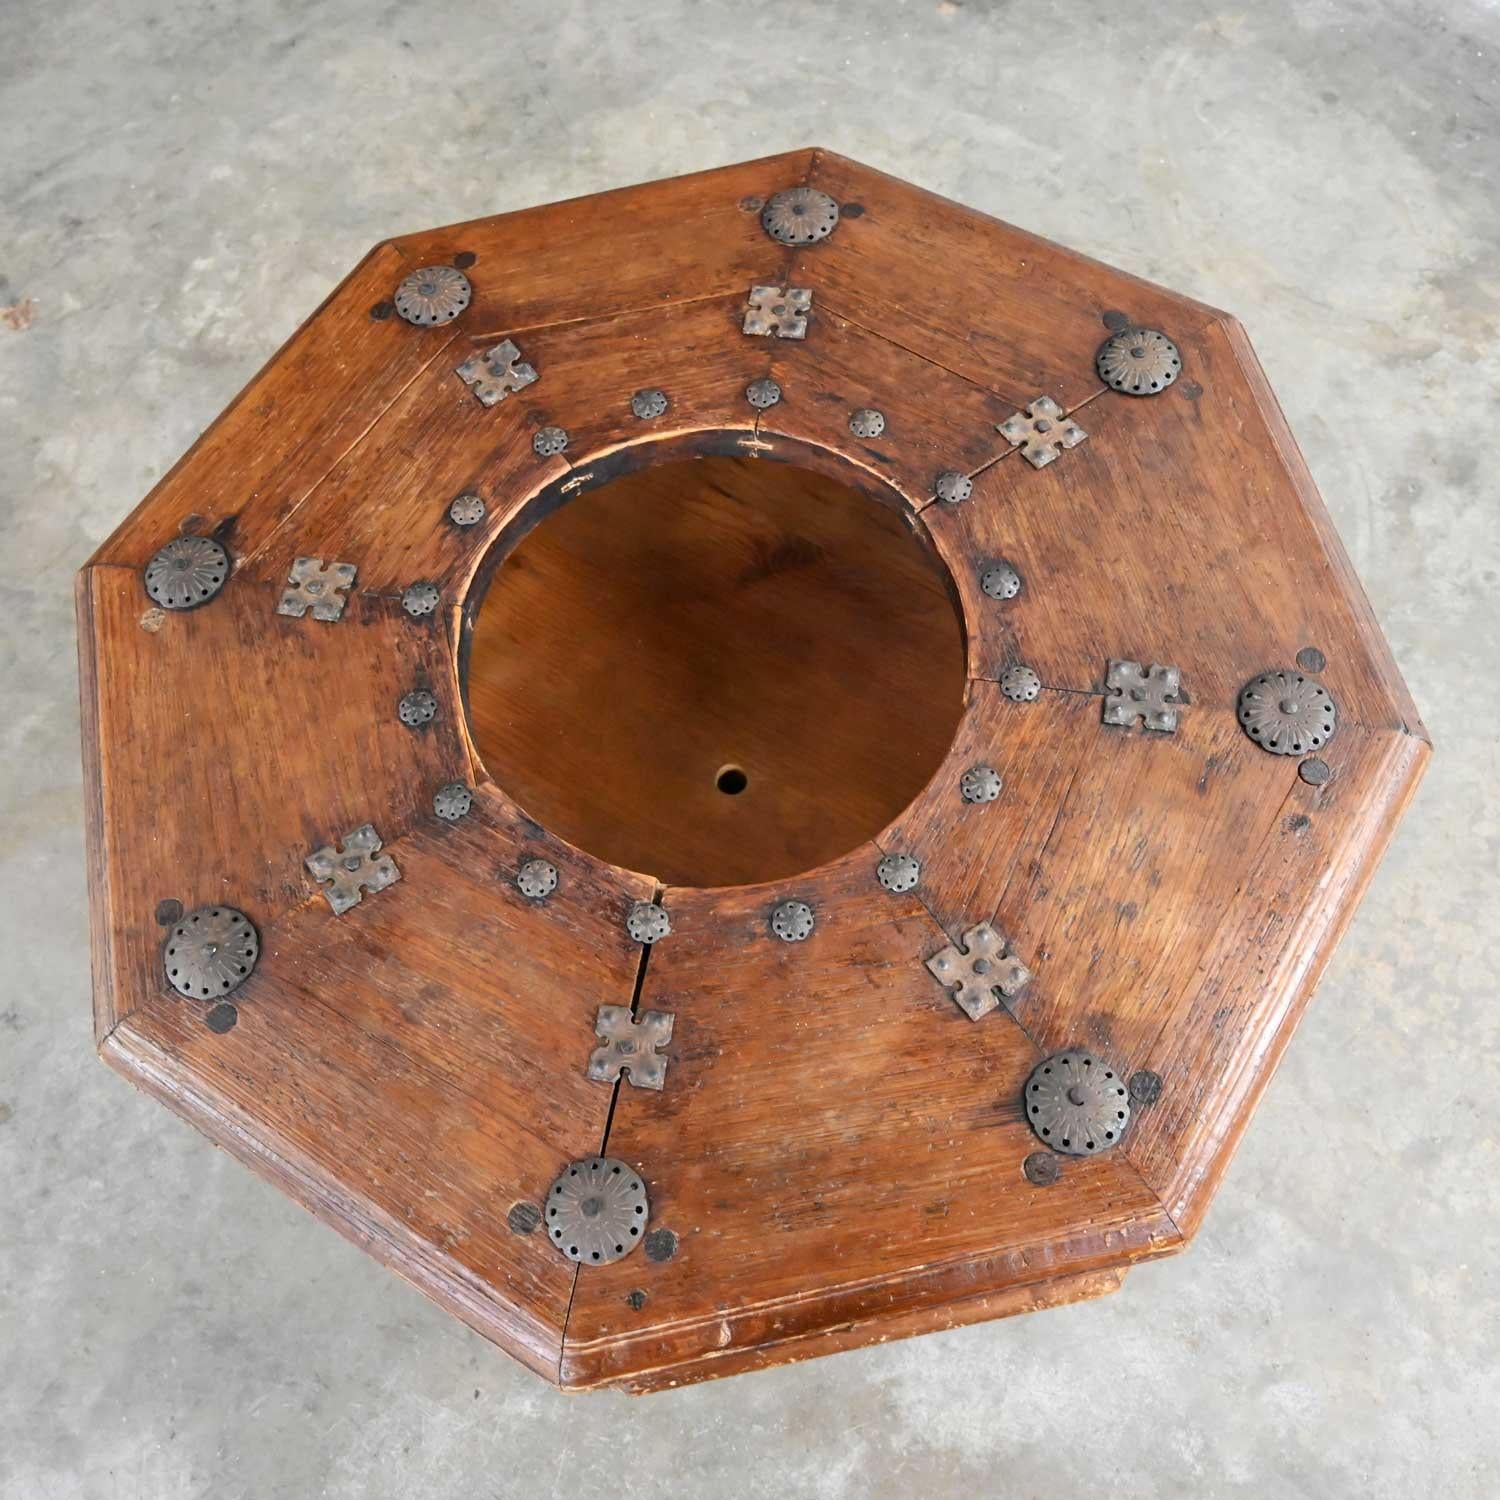 Steel Spanish Colonial Revival Rustic Octagon Brazier Coffee Table Style Artes De Mexi